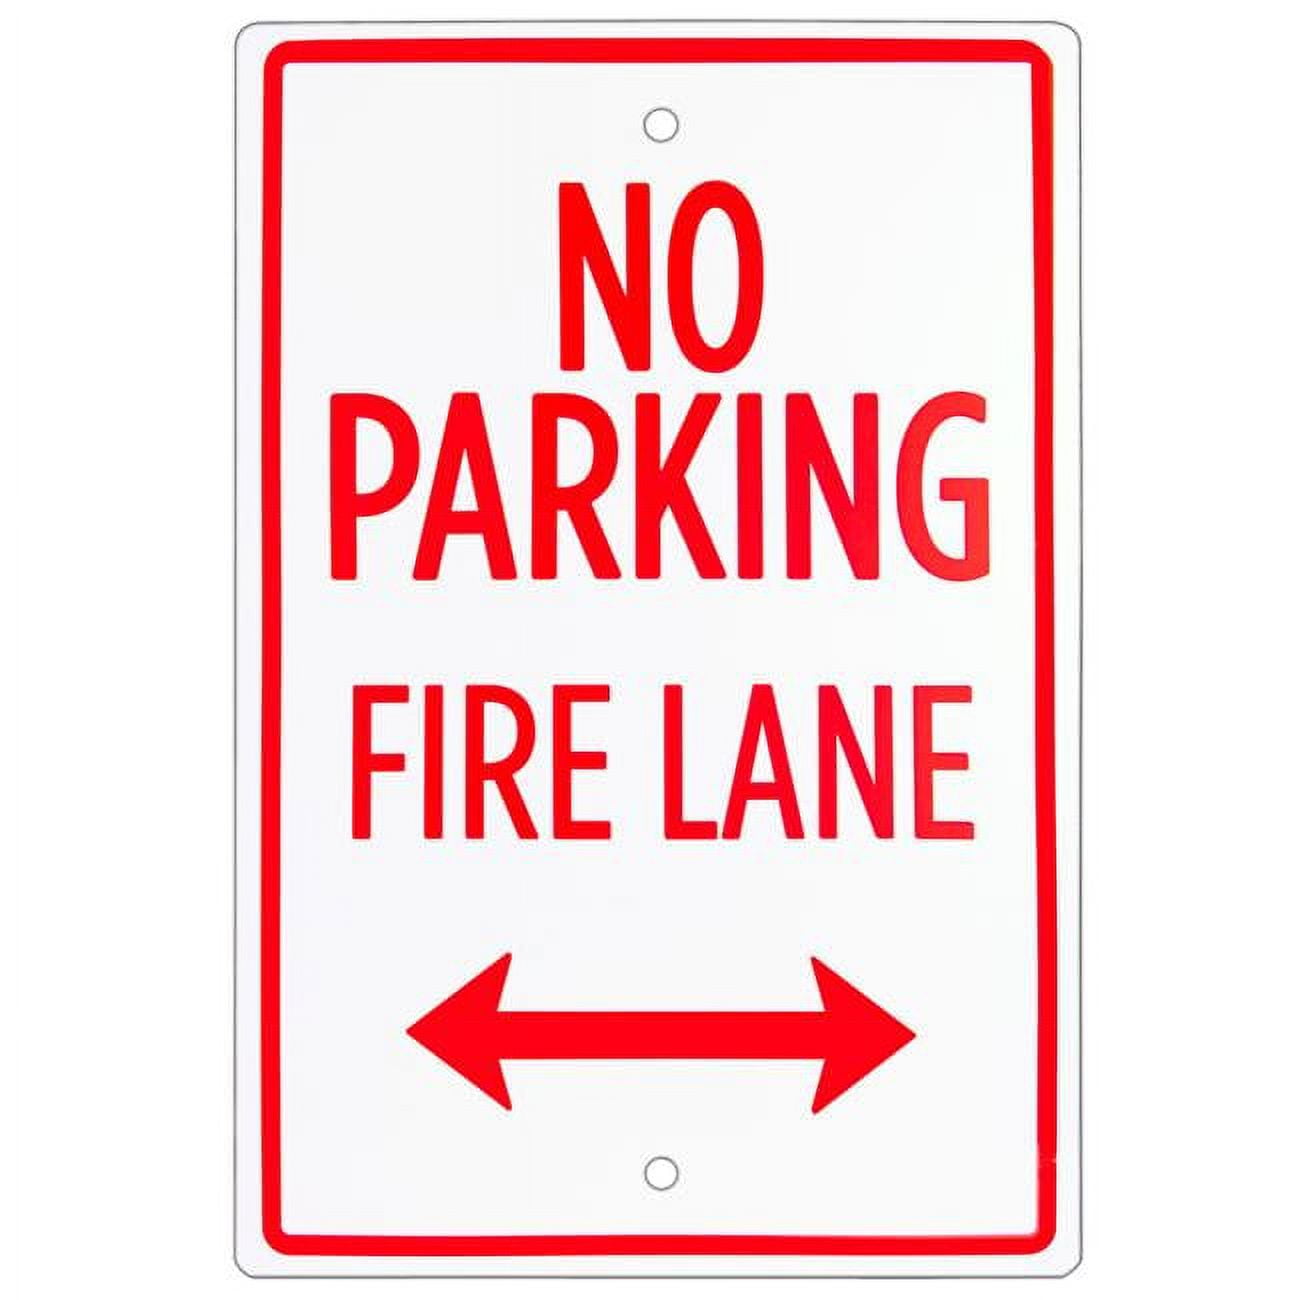 Isgn-005 18 X 12 In. No Parking Fire Lane Sign